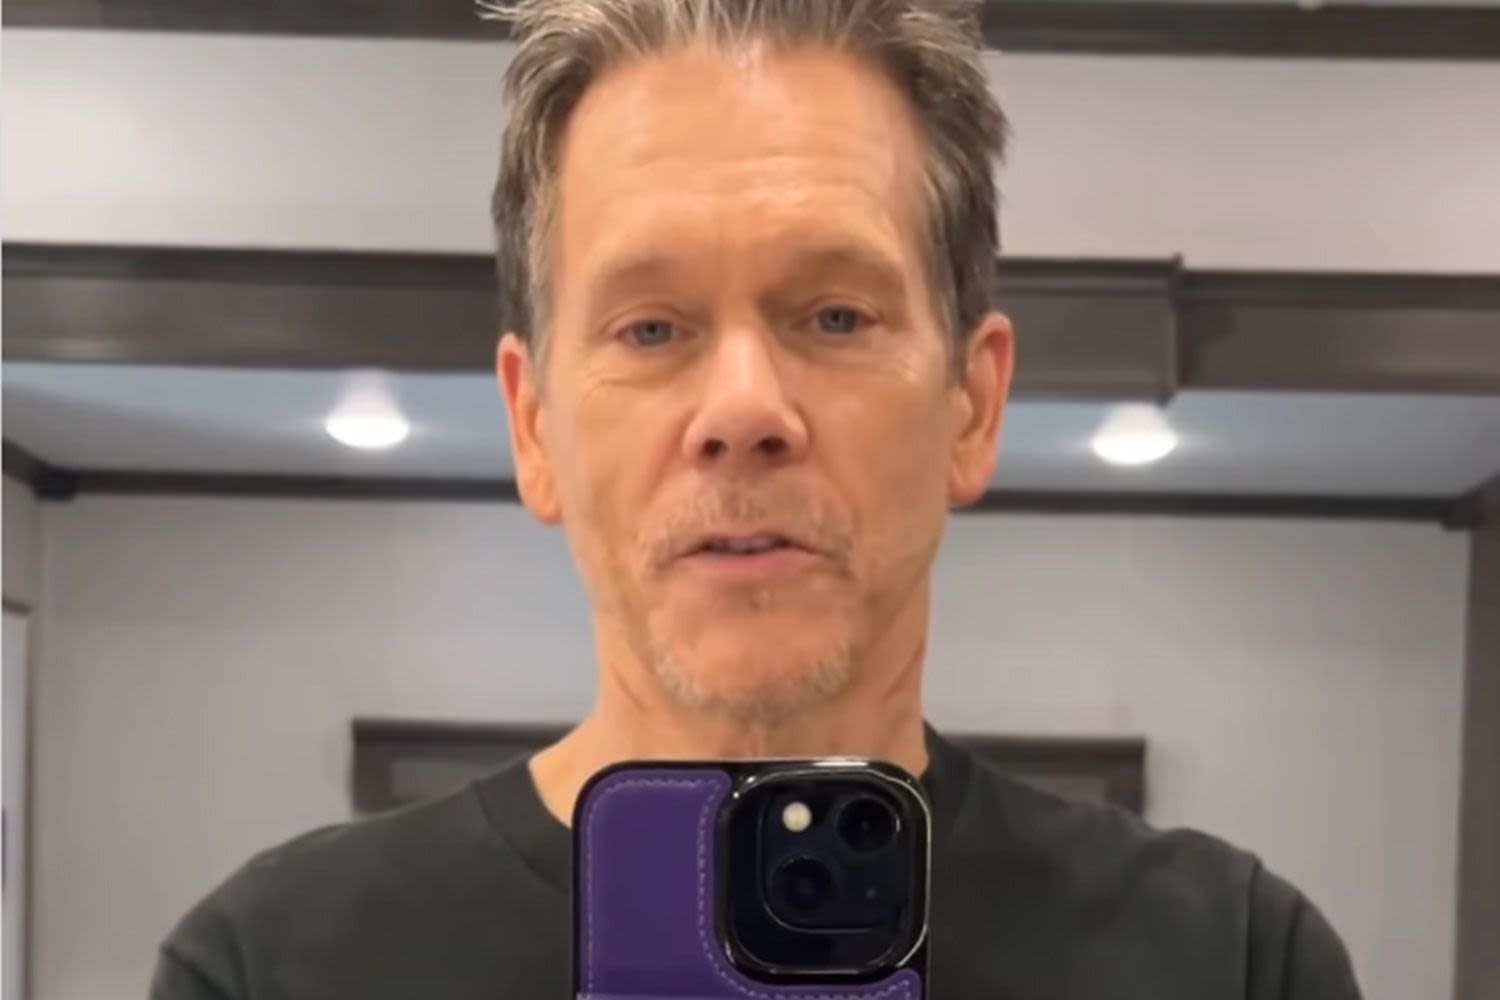 Kevin Bacon Gets Pranked on Set with Photos of Kyra Sedgwick All over His Trailer. See Her Funny Response